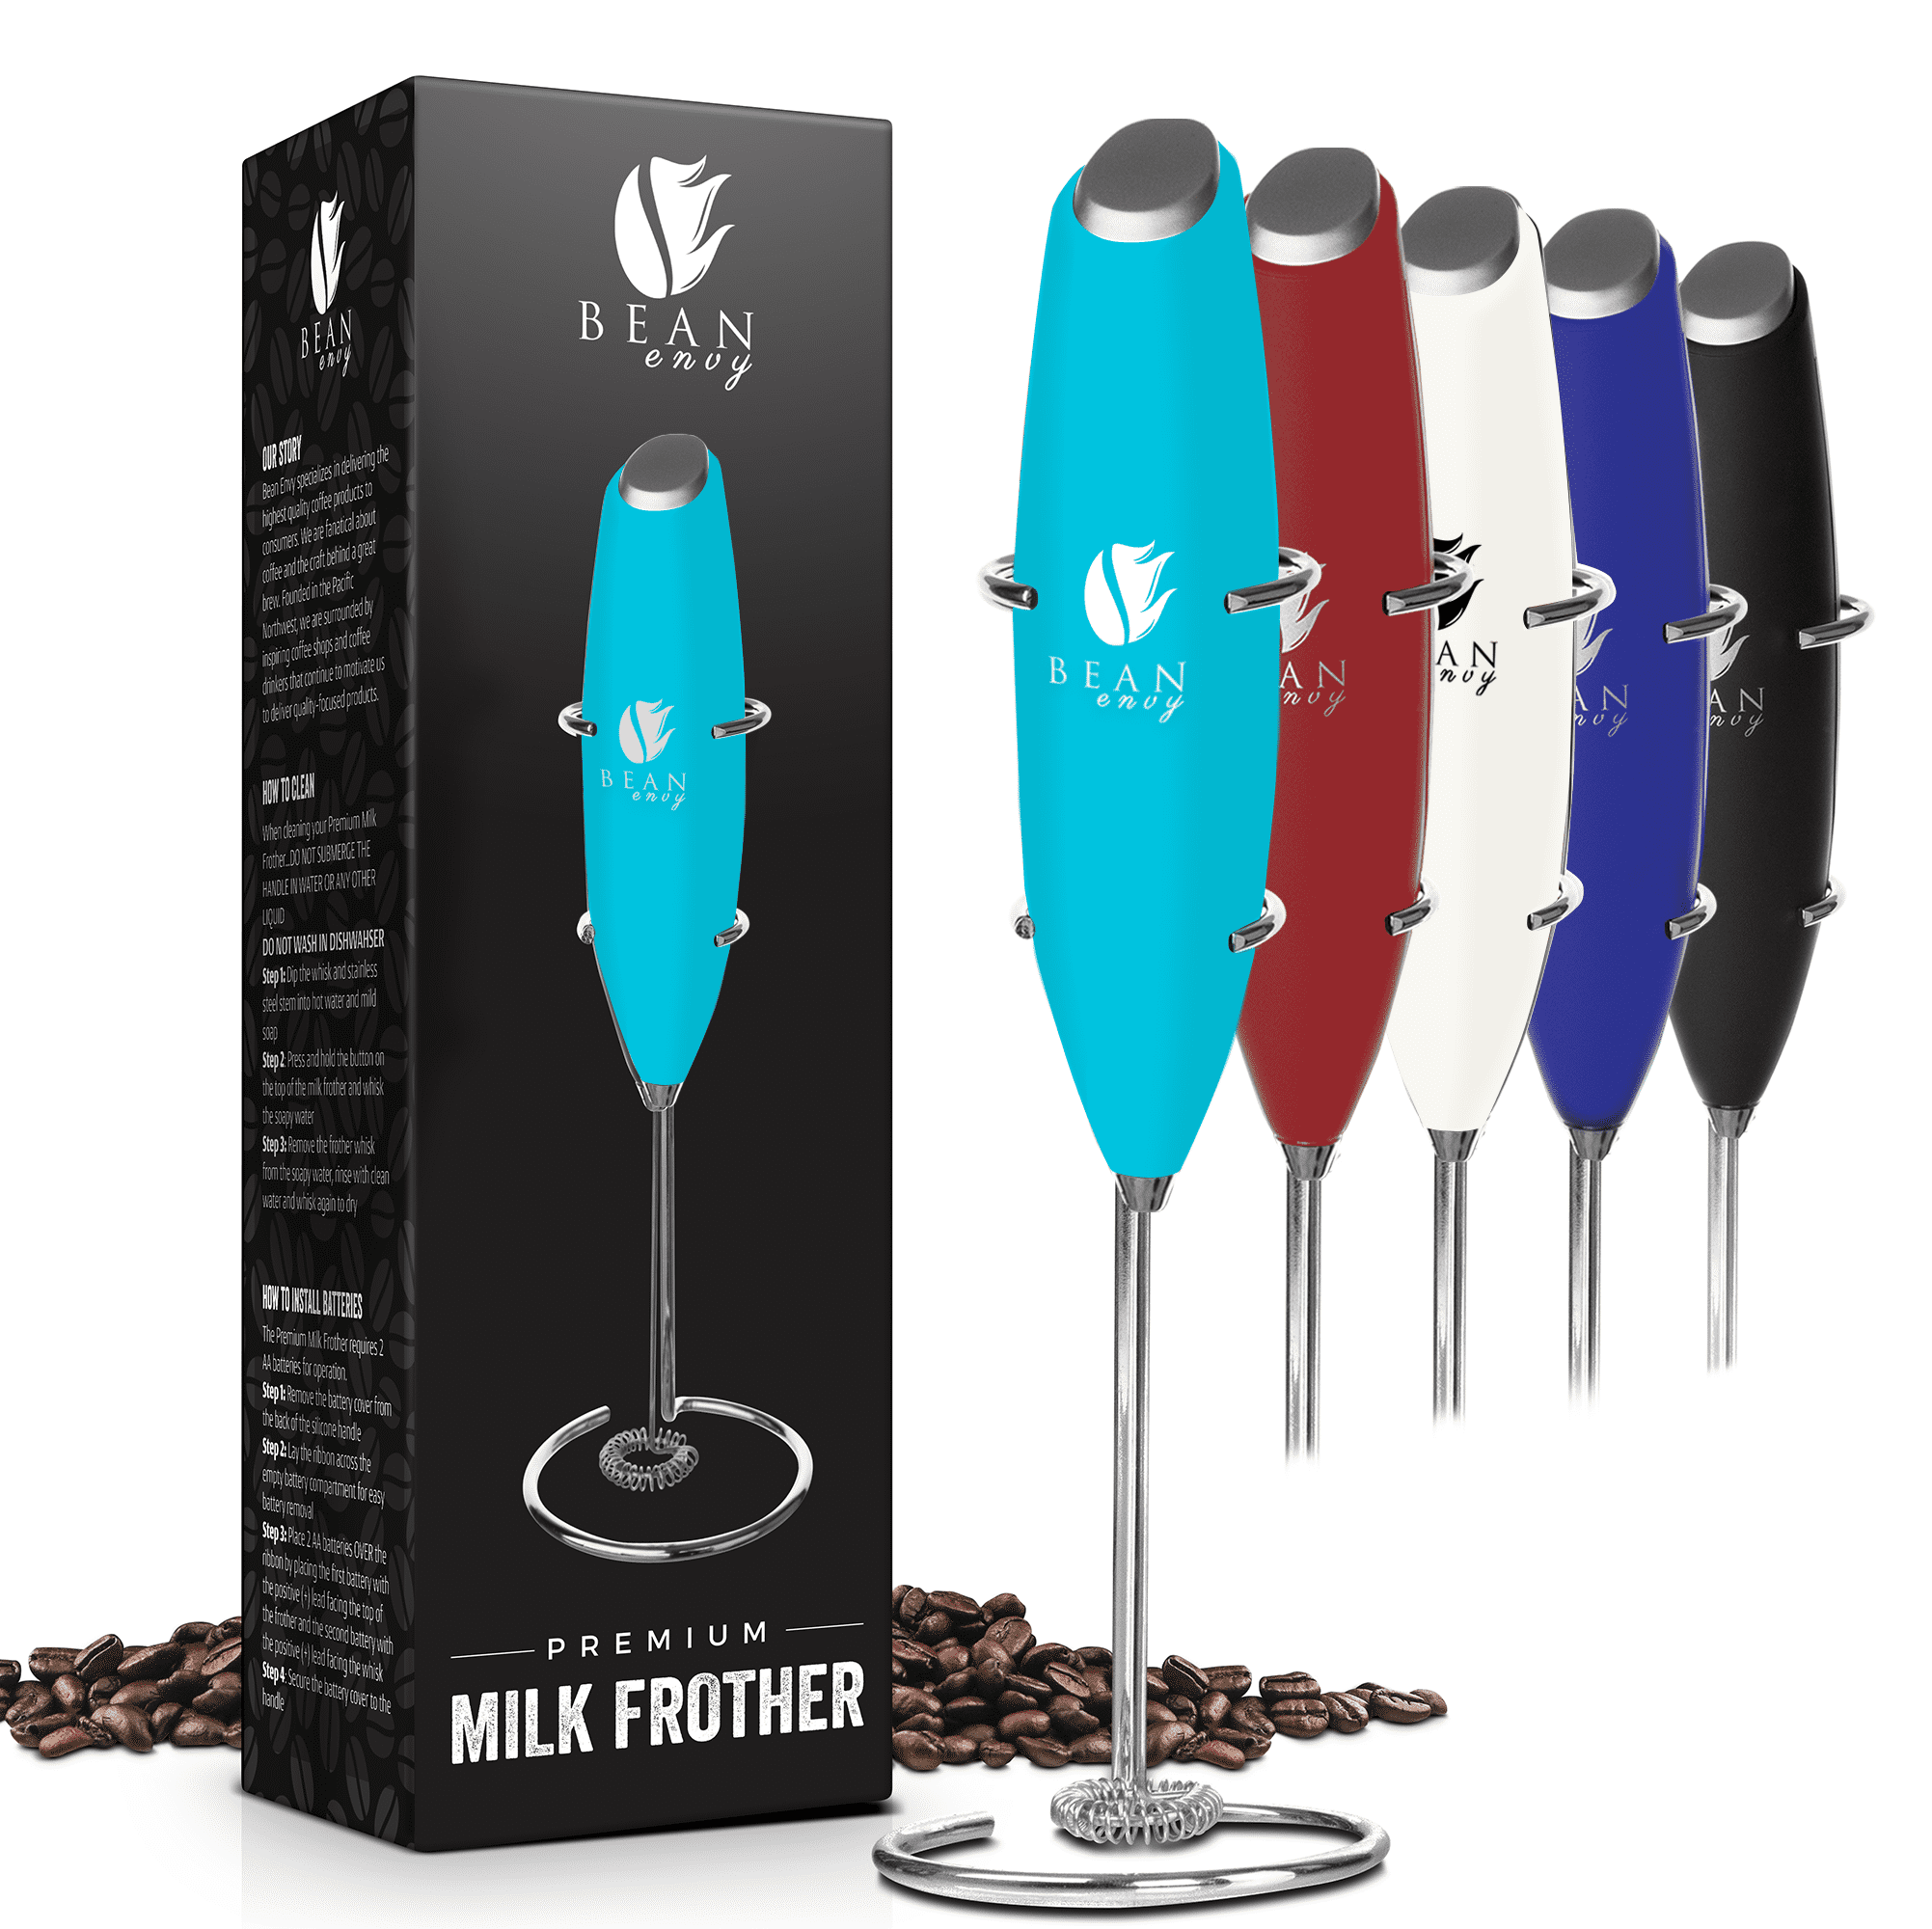 JEEXI Pro Milk Frother Handheld With Stand - Powerful Coffee